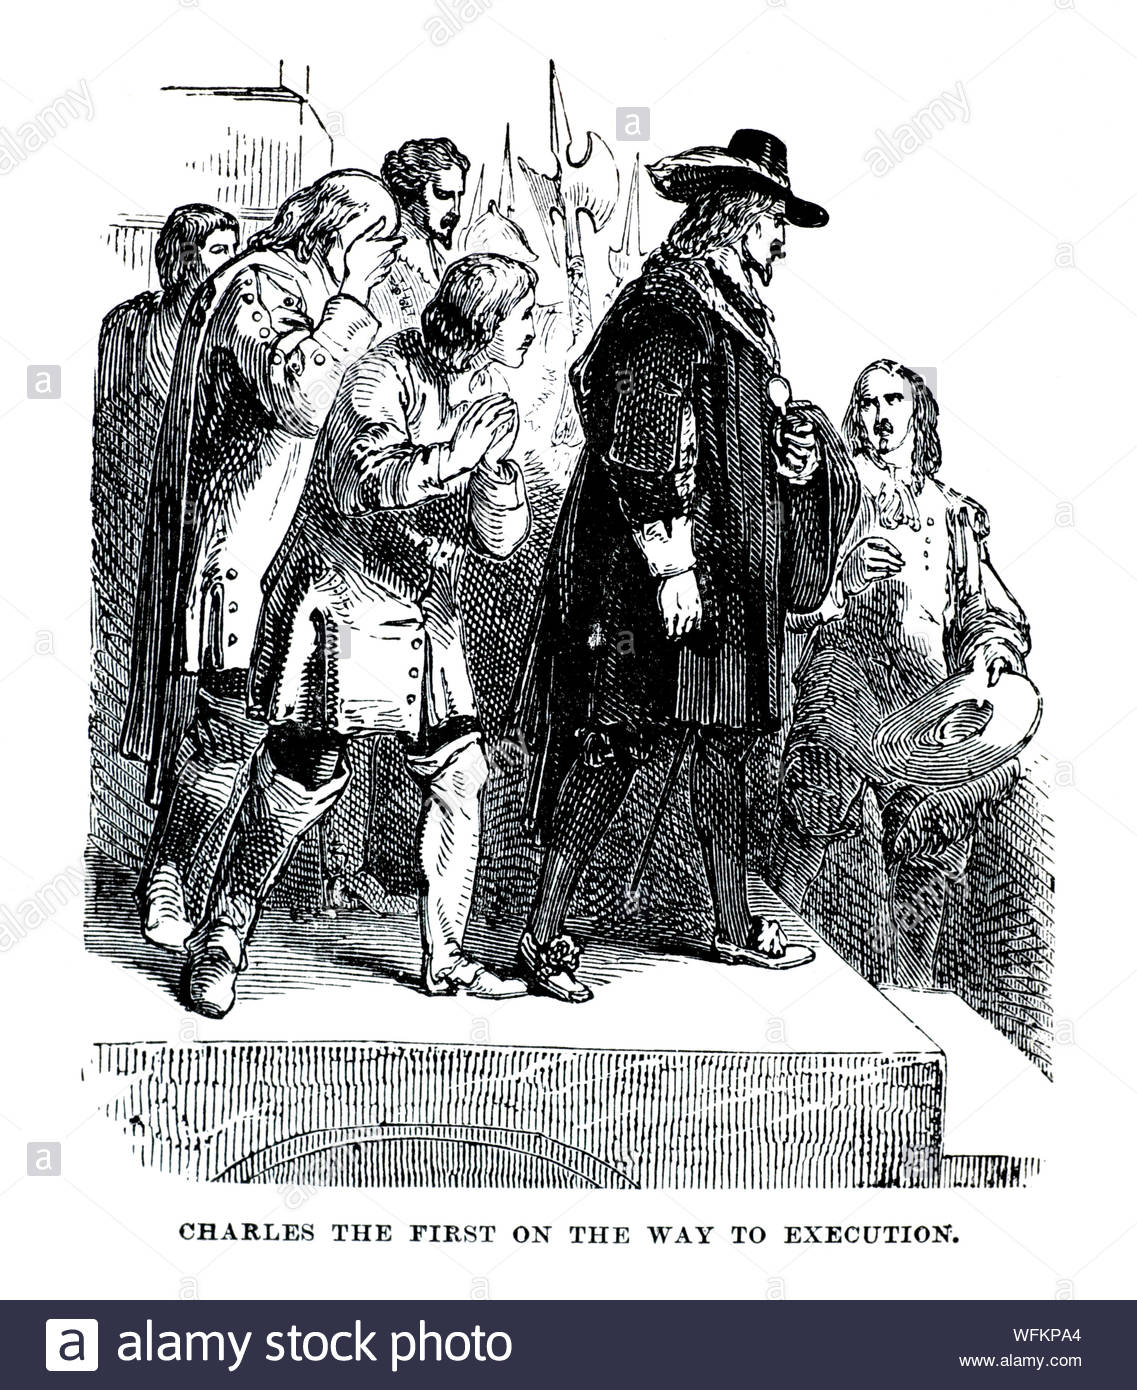 King Charles I being summoned to his execution on 30th January 1649, vintage illustration from 1900 Stock Photo